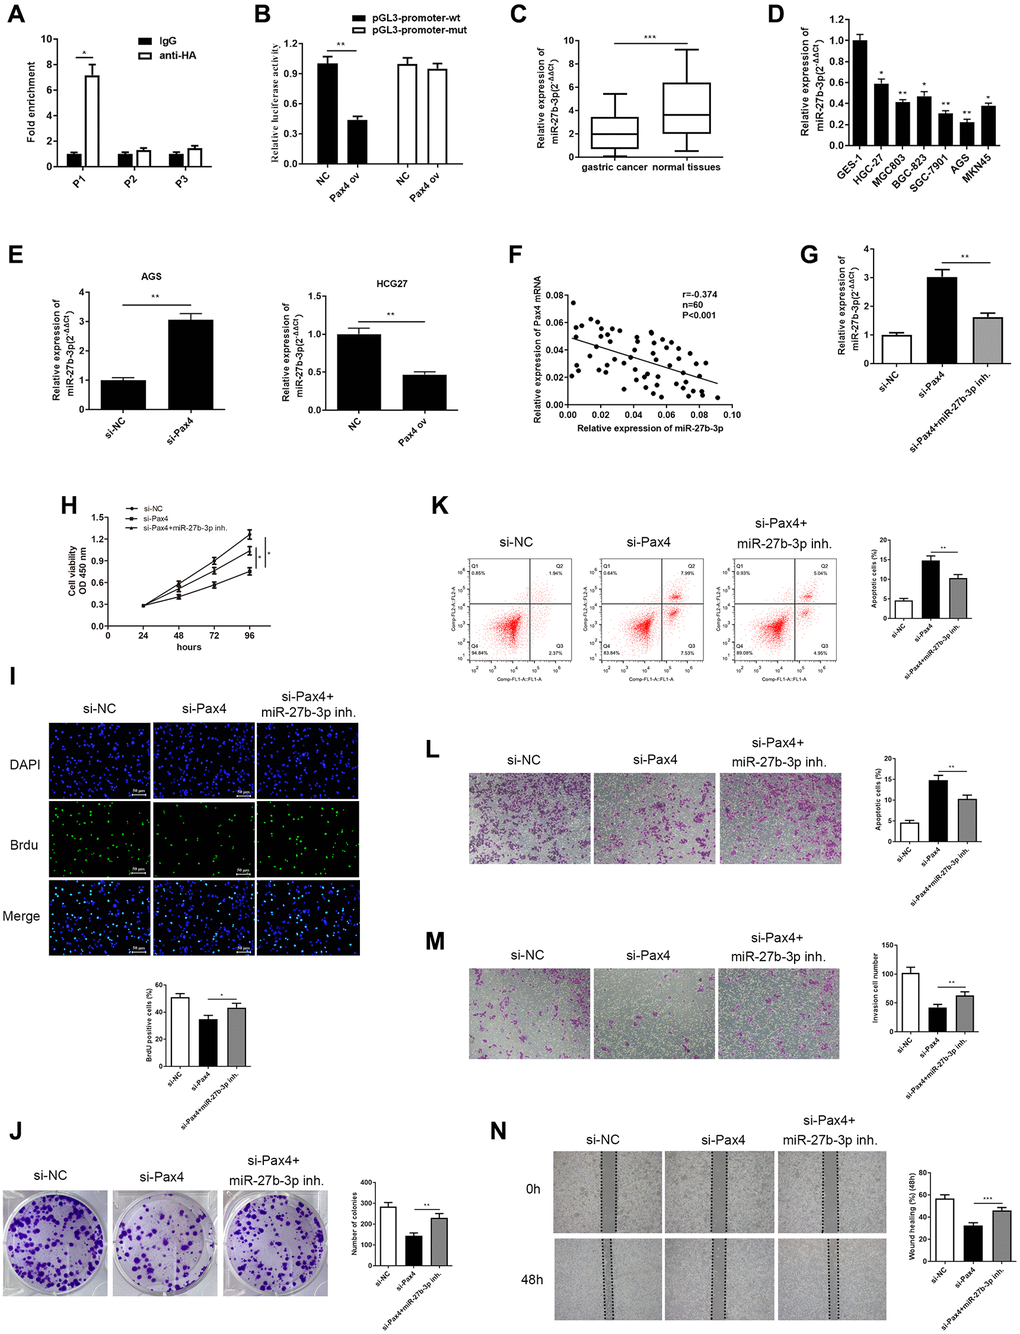 PAX4 targets and negatively regulates miR-27b-3p, and miR-27b-3p reversed PAX4 function in AGS cells. (A, B) The interaction between PAX4 and miR-27b-3p promoter region was validated through ChIP (P = 0.014) and dual luciferase assays (P = 0.0012). (C) The expression of miR-27b-3p was down-regulated in GC tissues (n = 60, P = 0.0004). (D) The expression of miR-27b-3p was down-regulated in six GC cell lines (HGC-27, MGC803, BGC-823, SGC-7901, AGS, MKN45) compared to the human gastric mucosal epithelial cell line GES-1. (E) Up-regulation of miR-27b-3p level was detected in the PAX4 knockdown group in AGS cells (P = 0.0061) and down-regulated miR-27b-3p levels were detected in the PAX4 overexpression group in HGC-27 cells by qRT-PCR (P = 0.0095). (F) There is a negative correlation between PAX4 and miR-27b-3p expression. (G) Lower miR-27b-3p levels were detected via qRT-PCR after addition of miR-27b-3p inhibitor to the si-PAX4 group (P = 0.0077). (H–I) CCK-8 and BrdU assays (P = 0.0035) detected that decreased miR-27b-3p level promoted enhanced GC cell viability and proliferation abilities. (J) Colony formation assay determined the numbers of colony formation (P = 0.0059). (K) GC cell apoptosis was examined via flow cytometry assay (P = 0.0077). (L–M) The increased cell migration (P = 0.0051) and invasion (P = 0.0051) abilities were identified when miR-27b-3p expression was inhibited by transwell assays. (N) Wound healing assay was utilized to discover enhanced GC cell metastasis in the absence of miR-27b-3p compared to the si-PAX4 group (P = 0.0006).